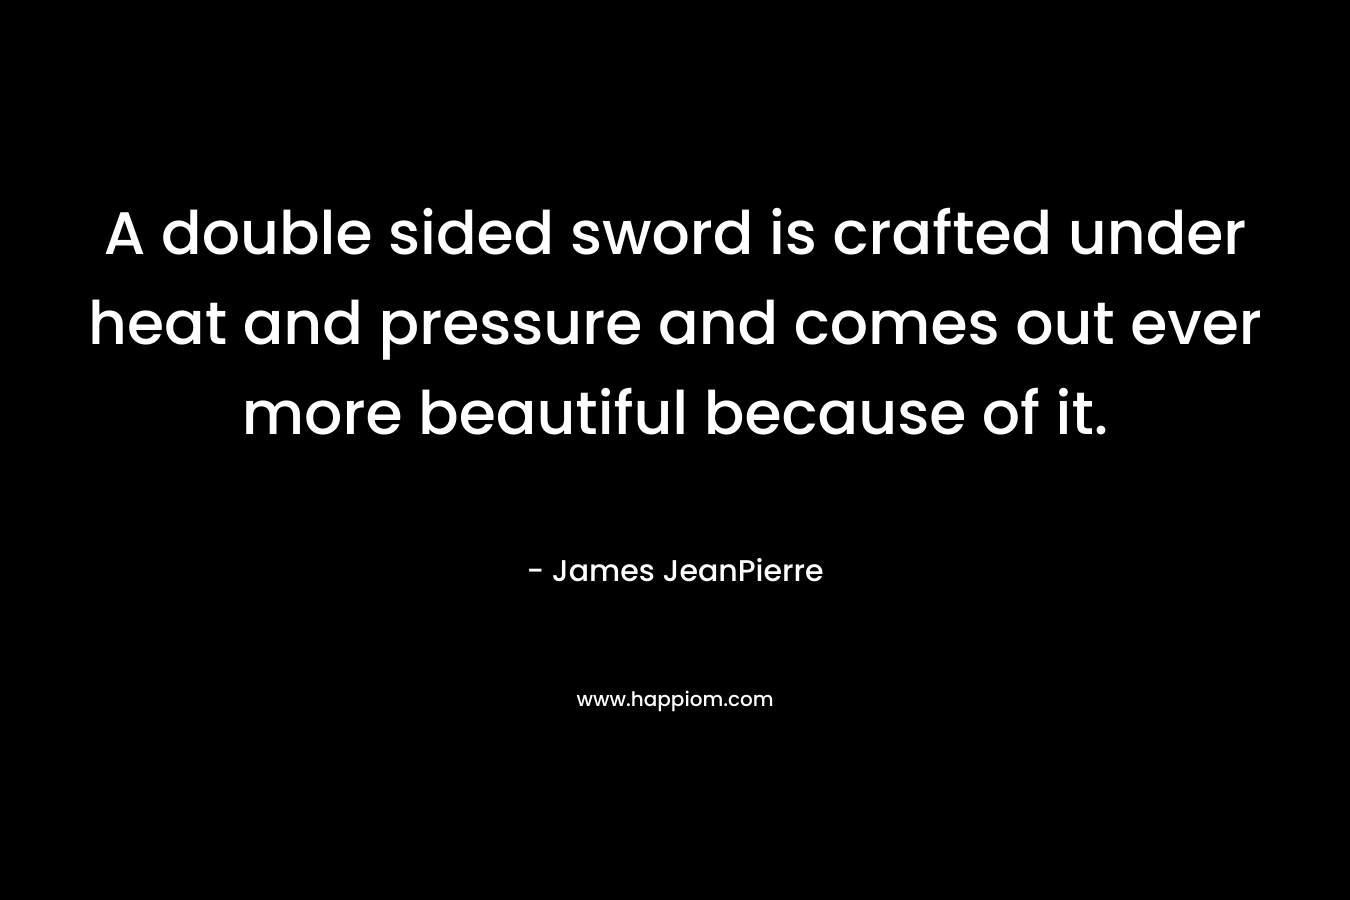 A double sided sword is crafted under heat and pressure and comes out ever more beautiful because of it. – James JeanPierre